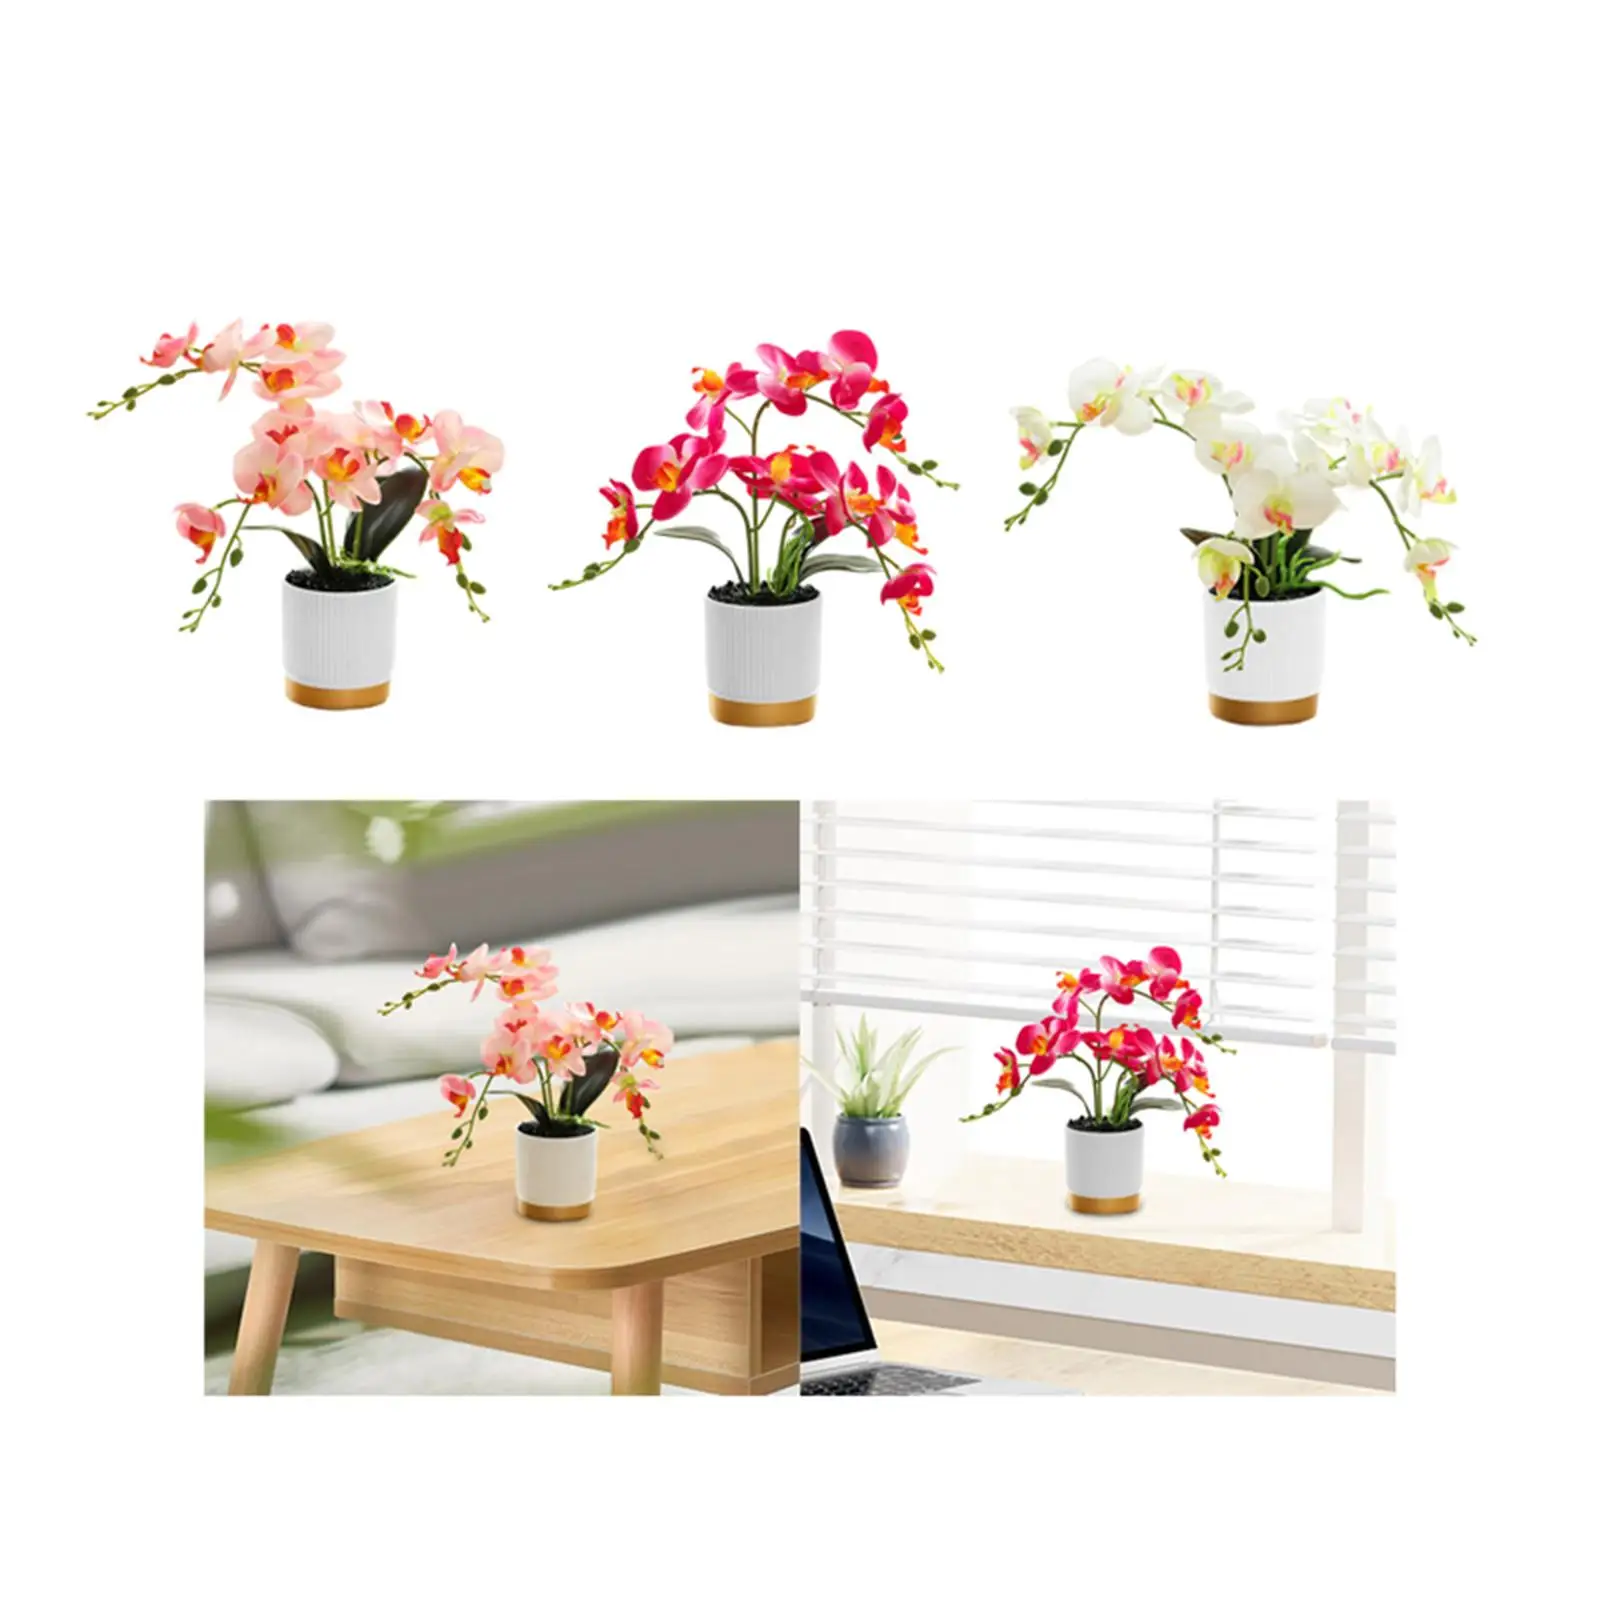 Artificial Flower in Pot Potted Plants Easy to Clean Ornament Fake Orchid Bonsai for Garden Bathroom Spring Festival Kitchen